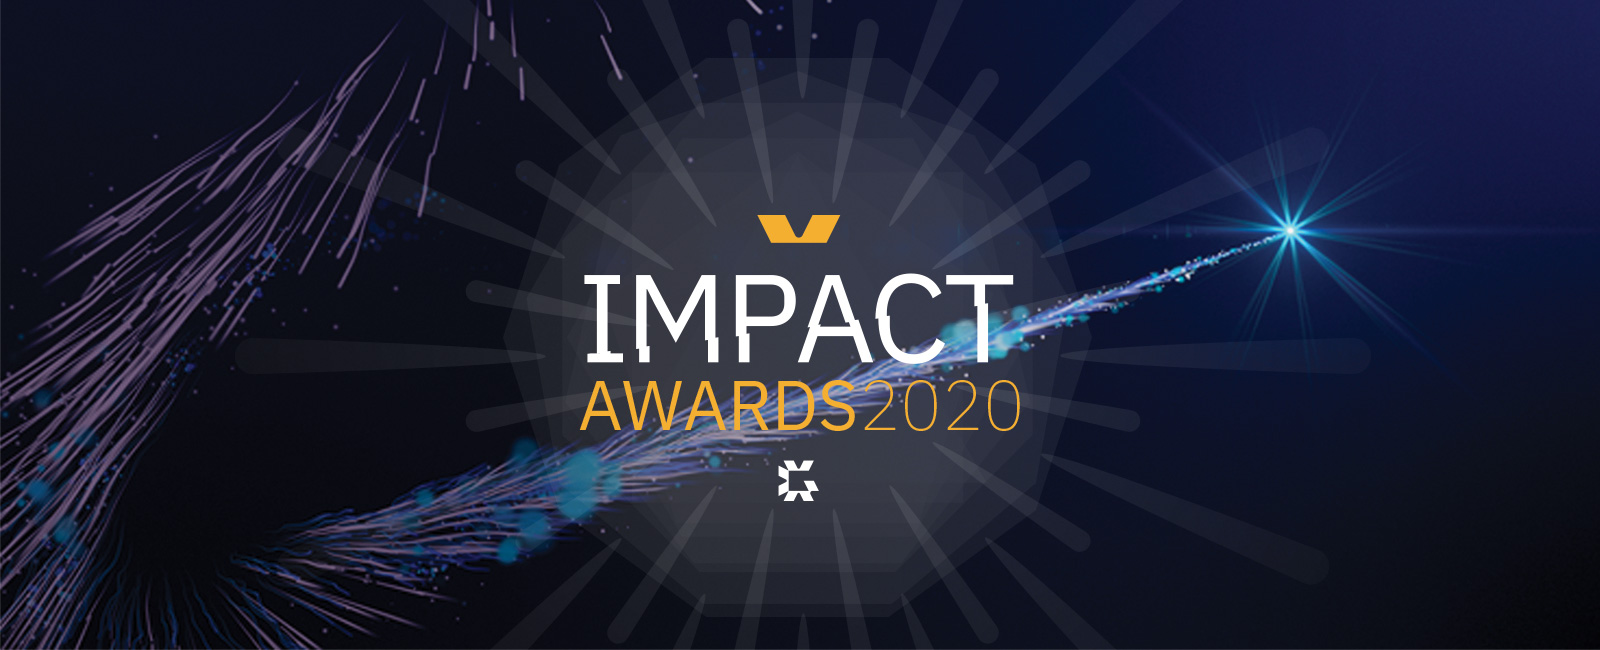 Impact Awards 2020: Congratulations to our winners!